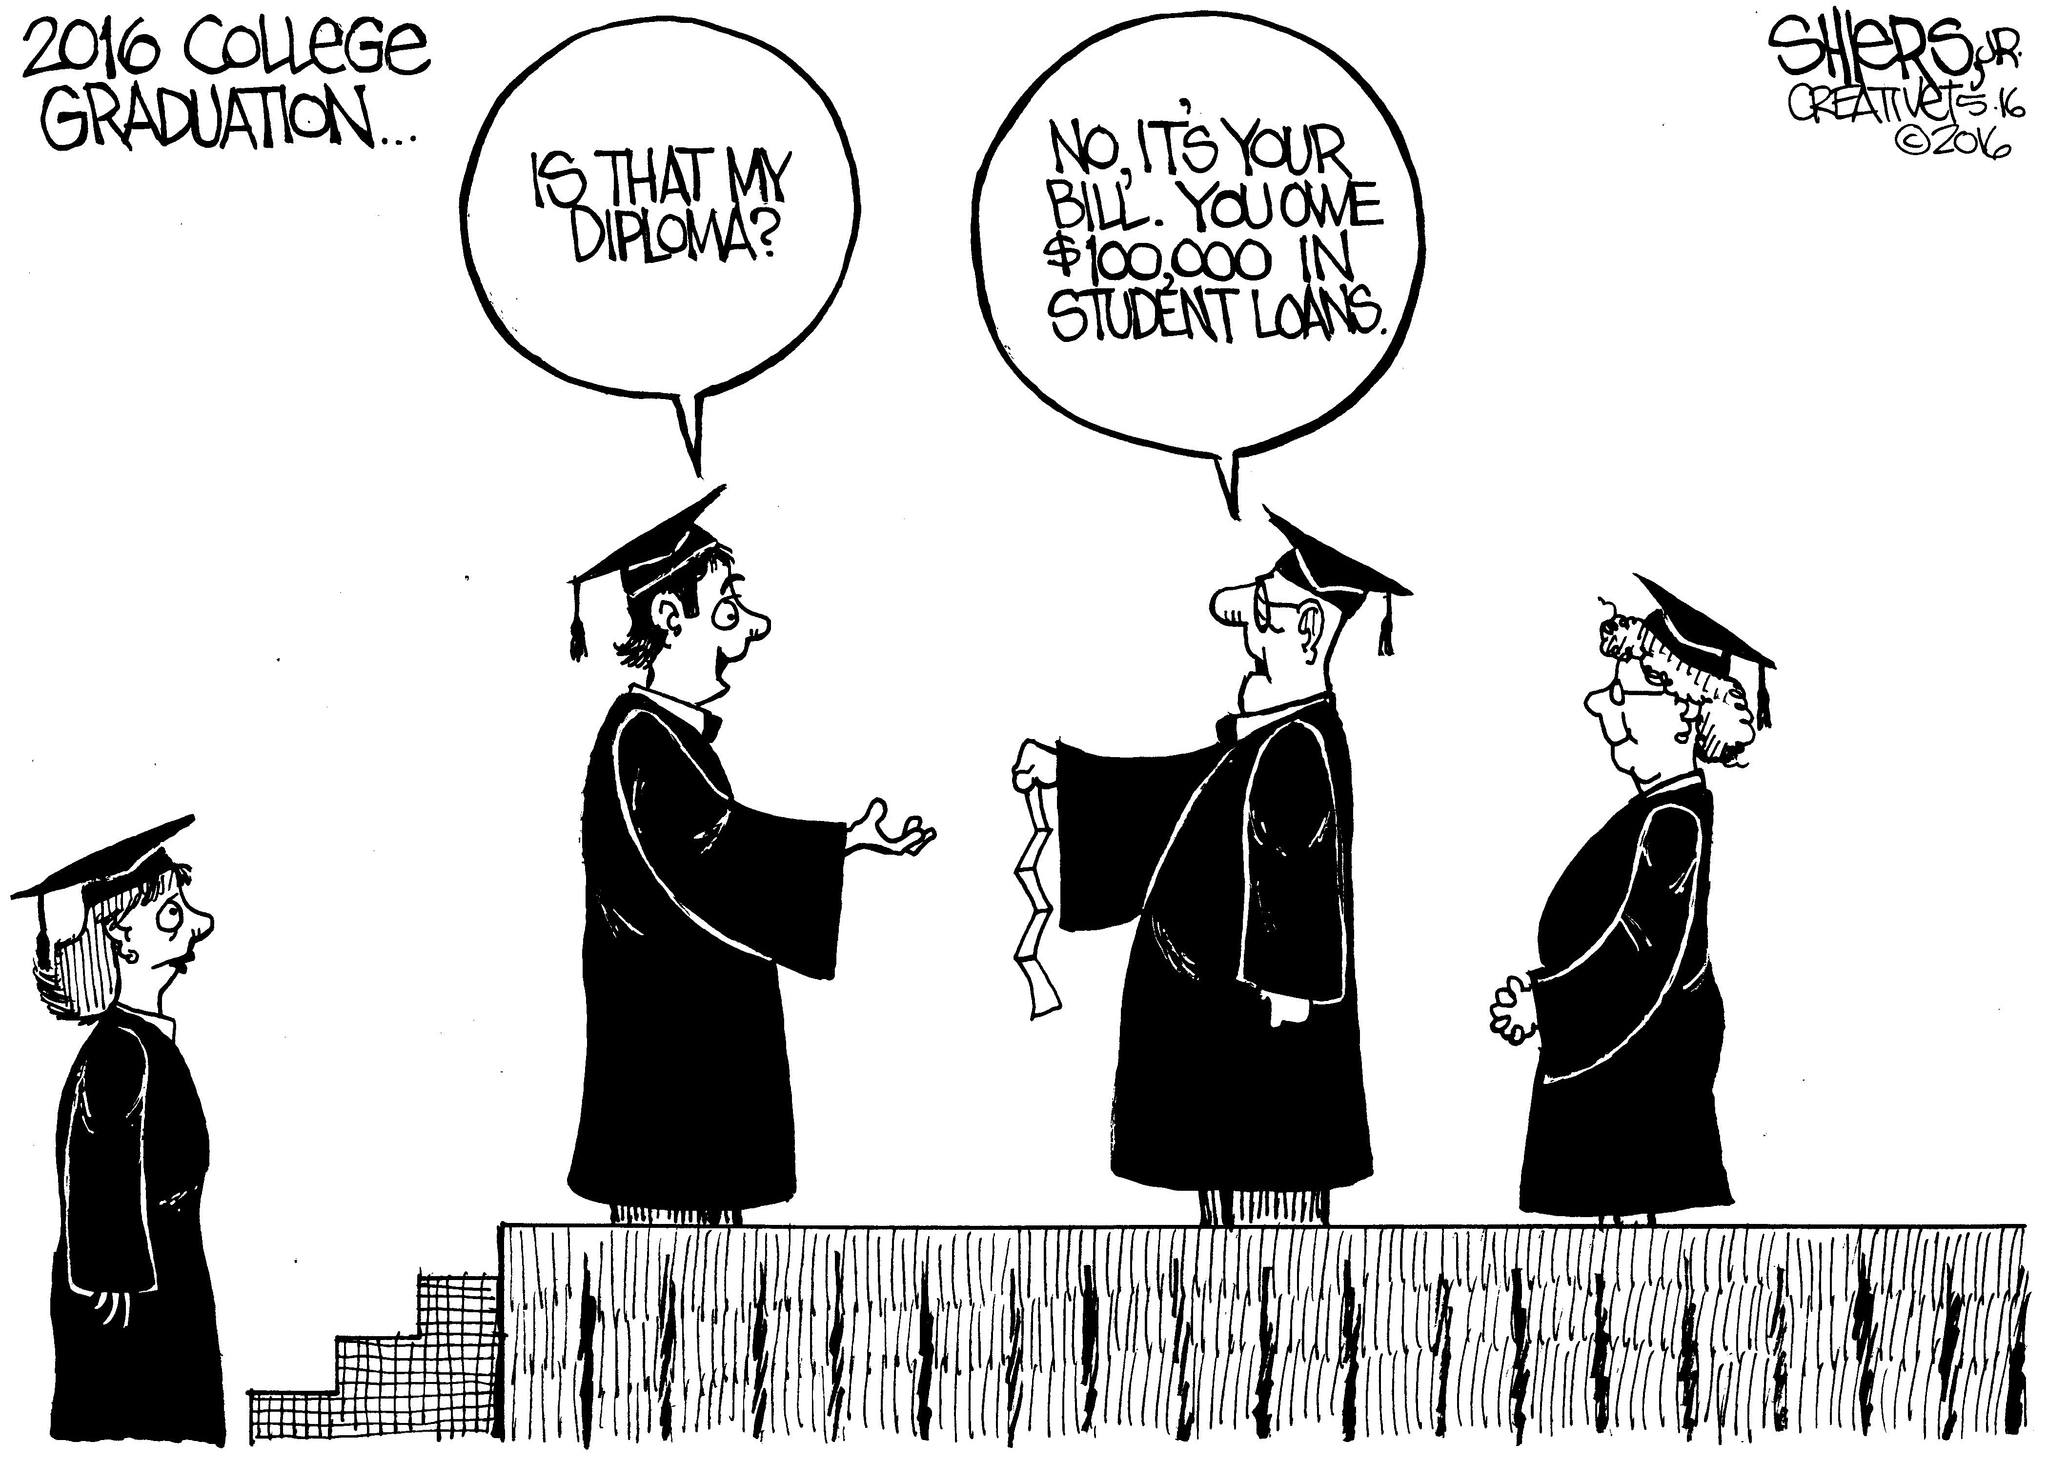 Is that my diploma? | Cartoon for May 17 - Frank Shiers